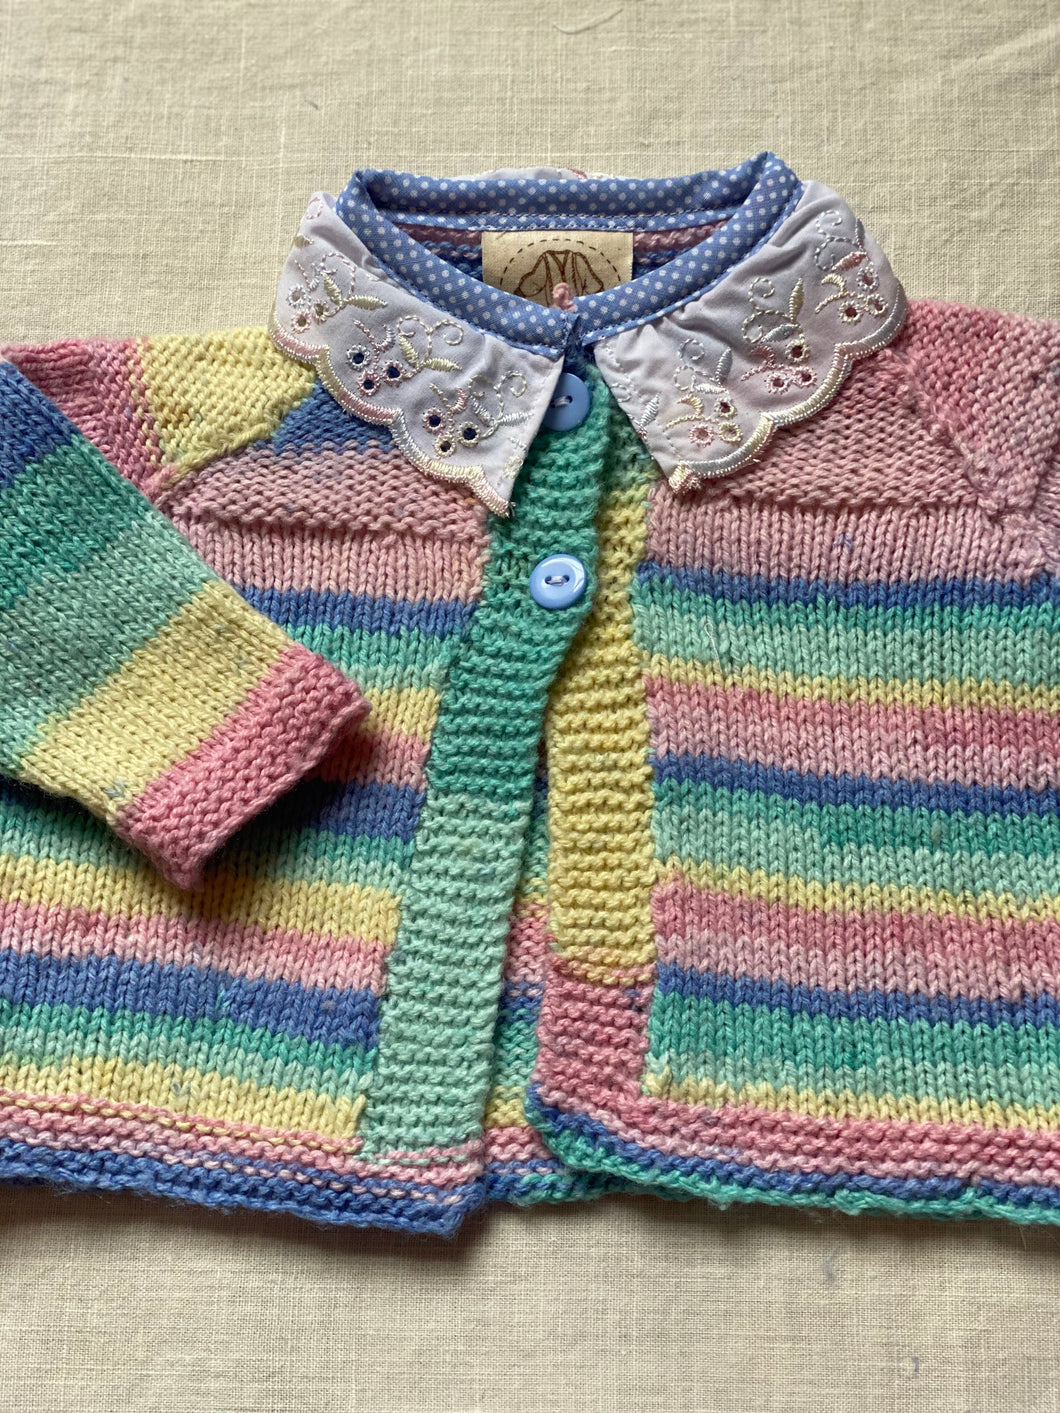 0-6 months - Pastel striped frilly cardigan